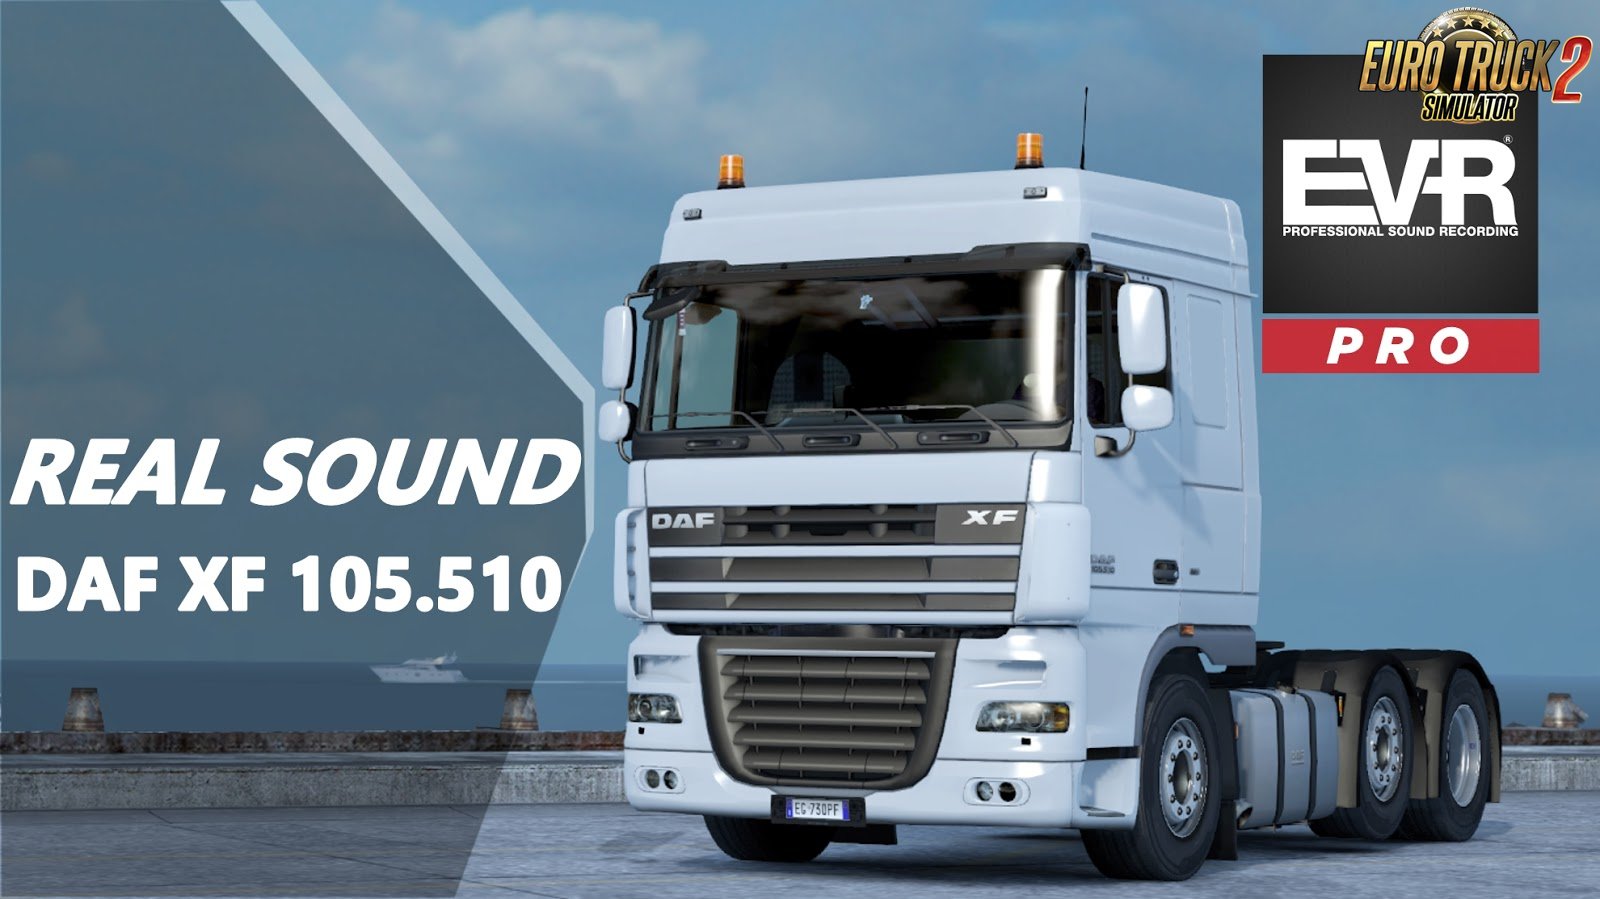 Real sound DAF XF 105.510 v1.5 Engine Voice Records